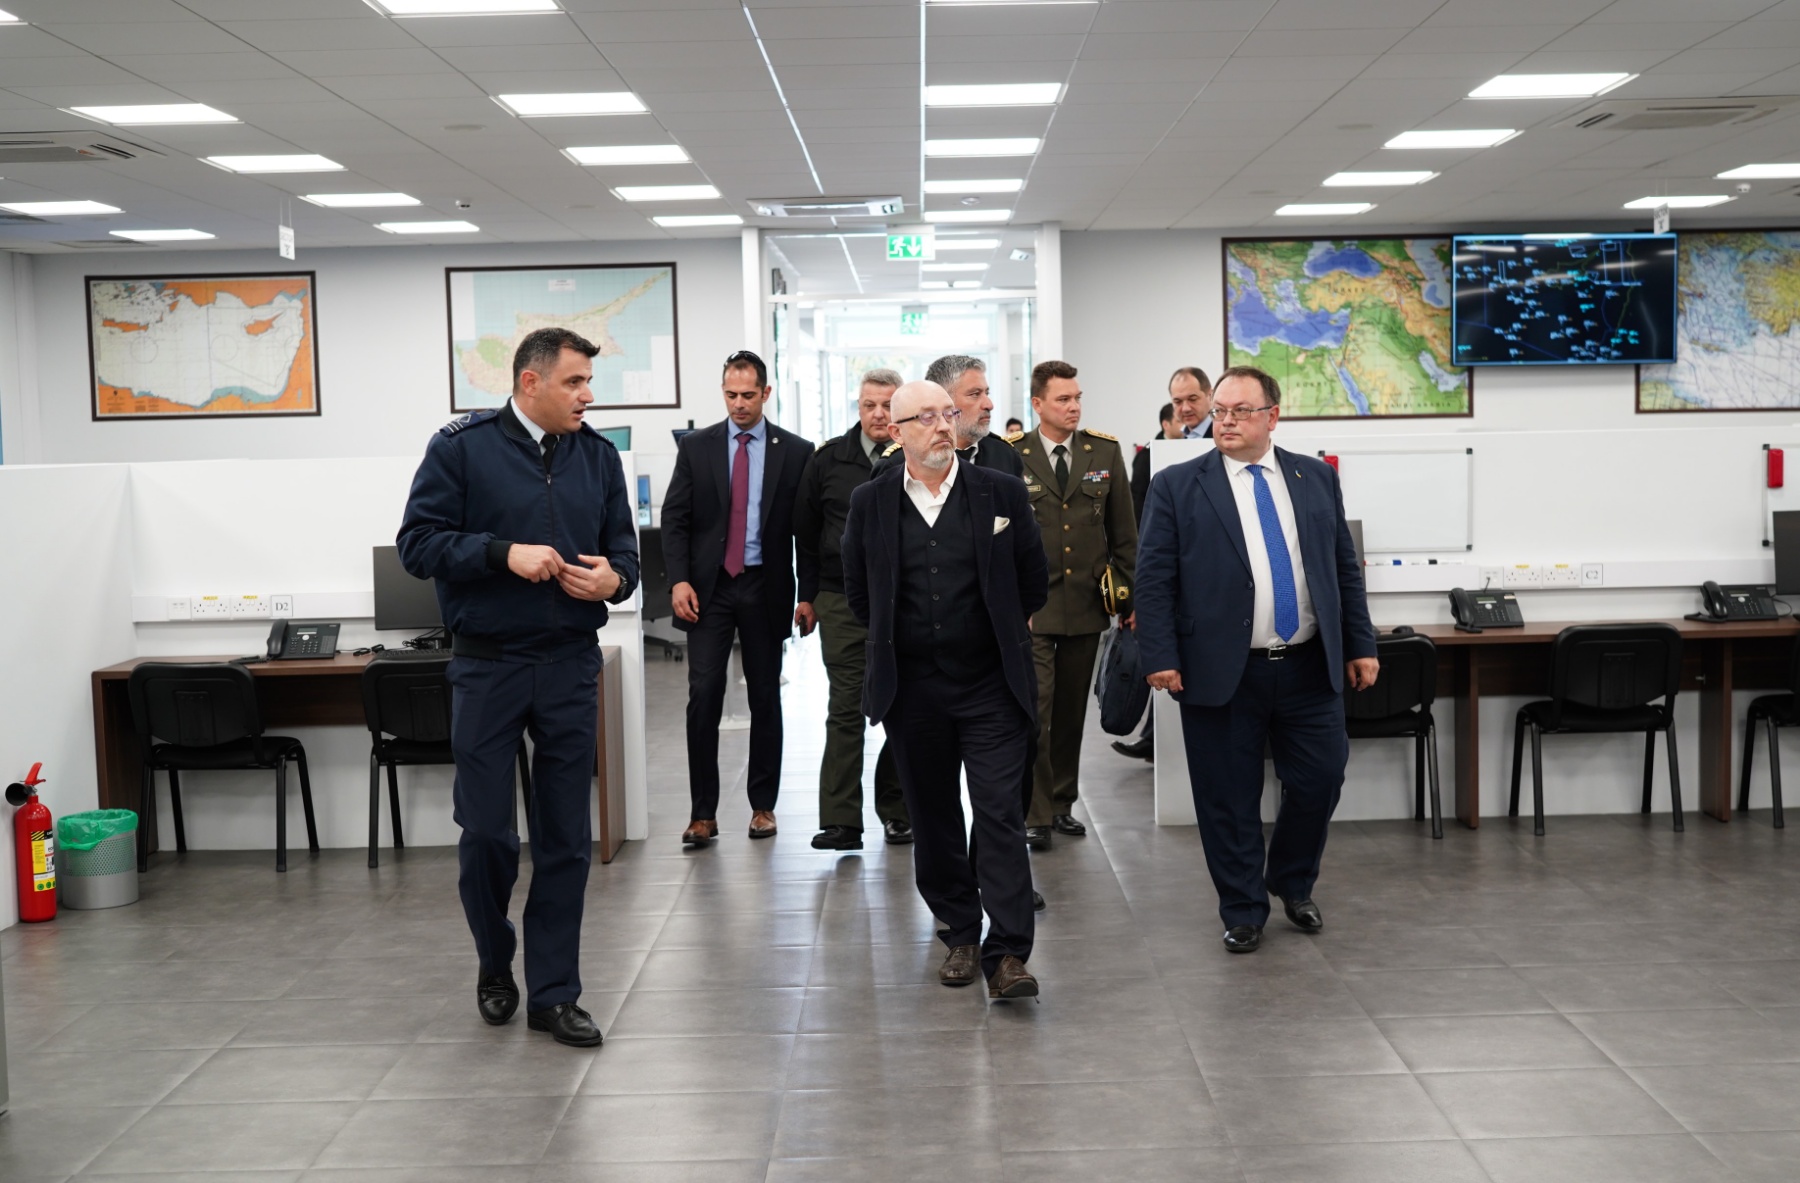 An informative visit to the JRCC, by the Minister of Defence of Ukraine